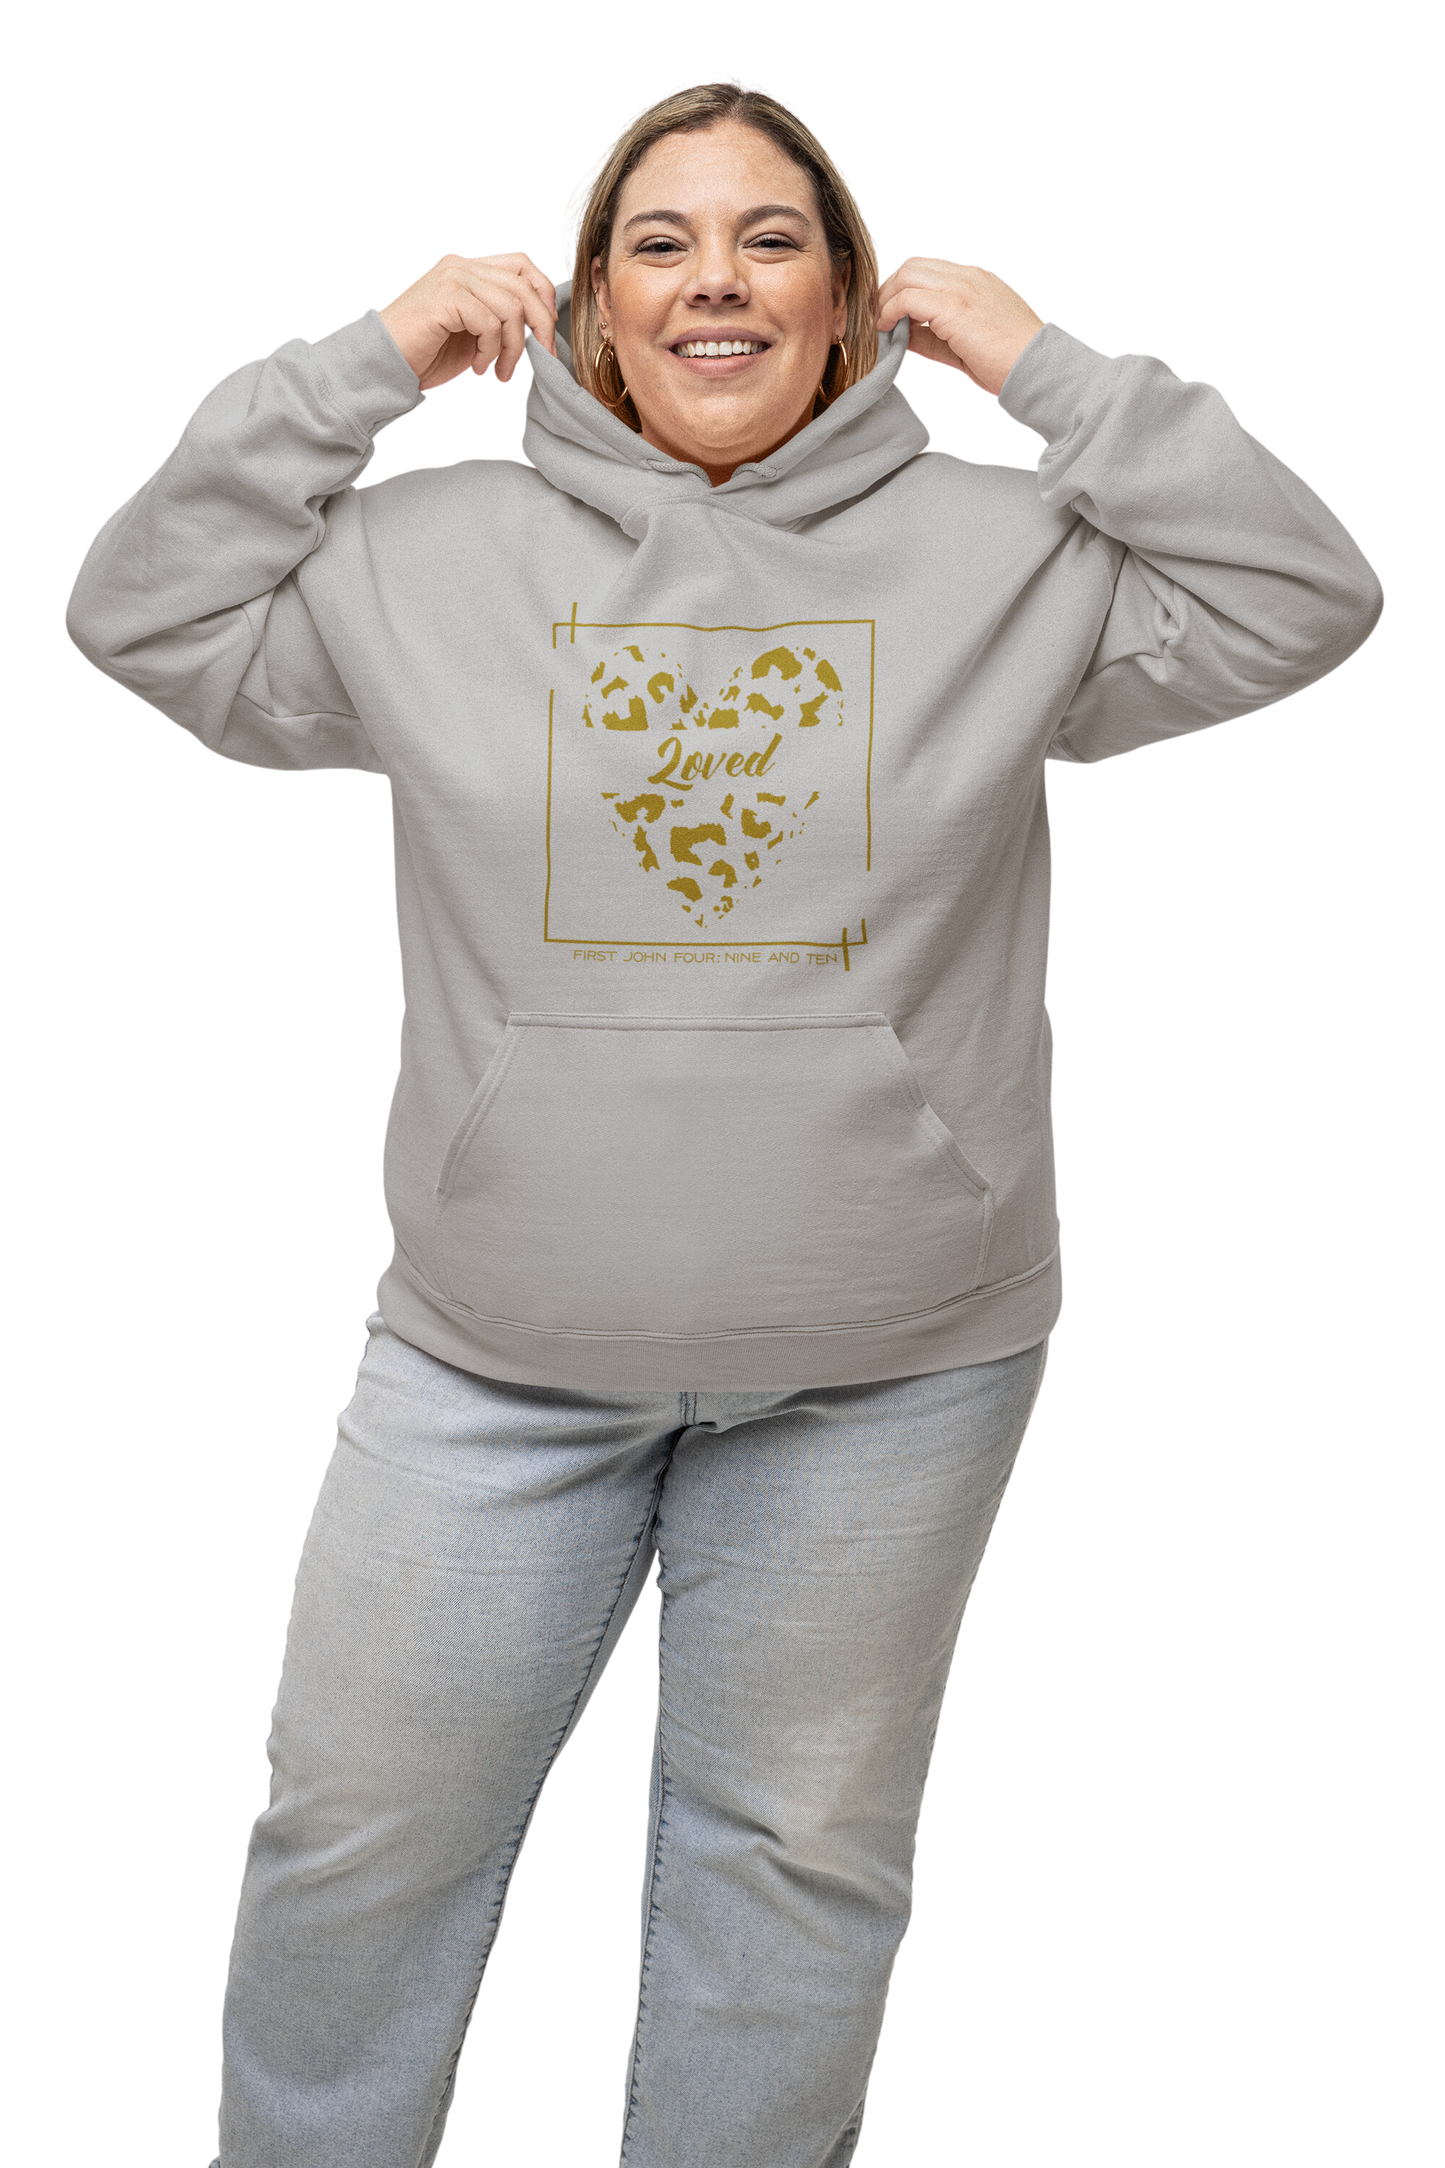 Loved-Hooded Sweatshirt (Available in more colors)